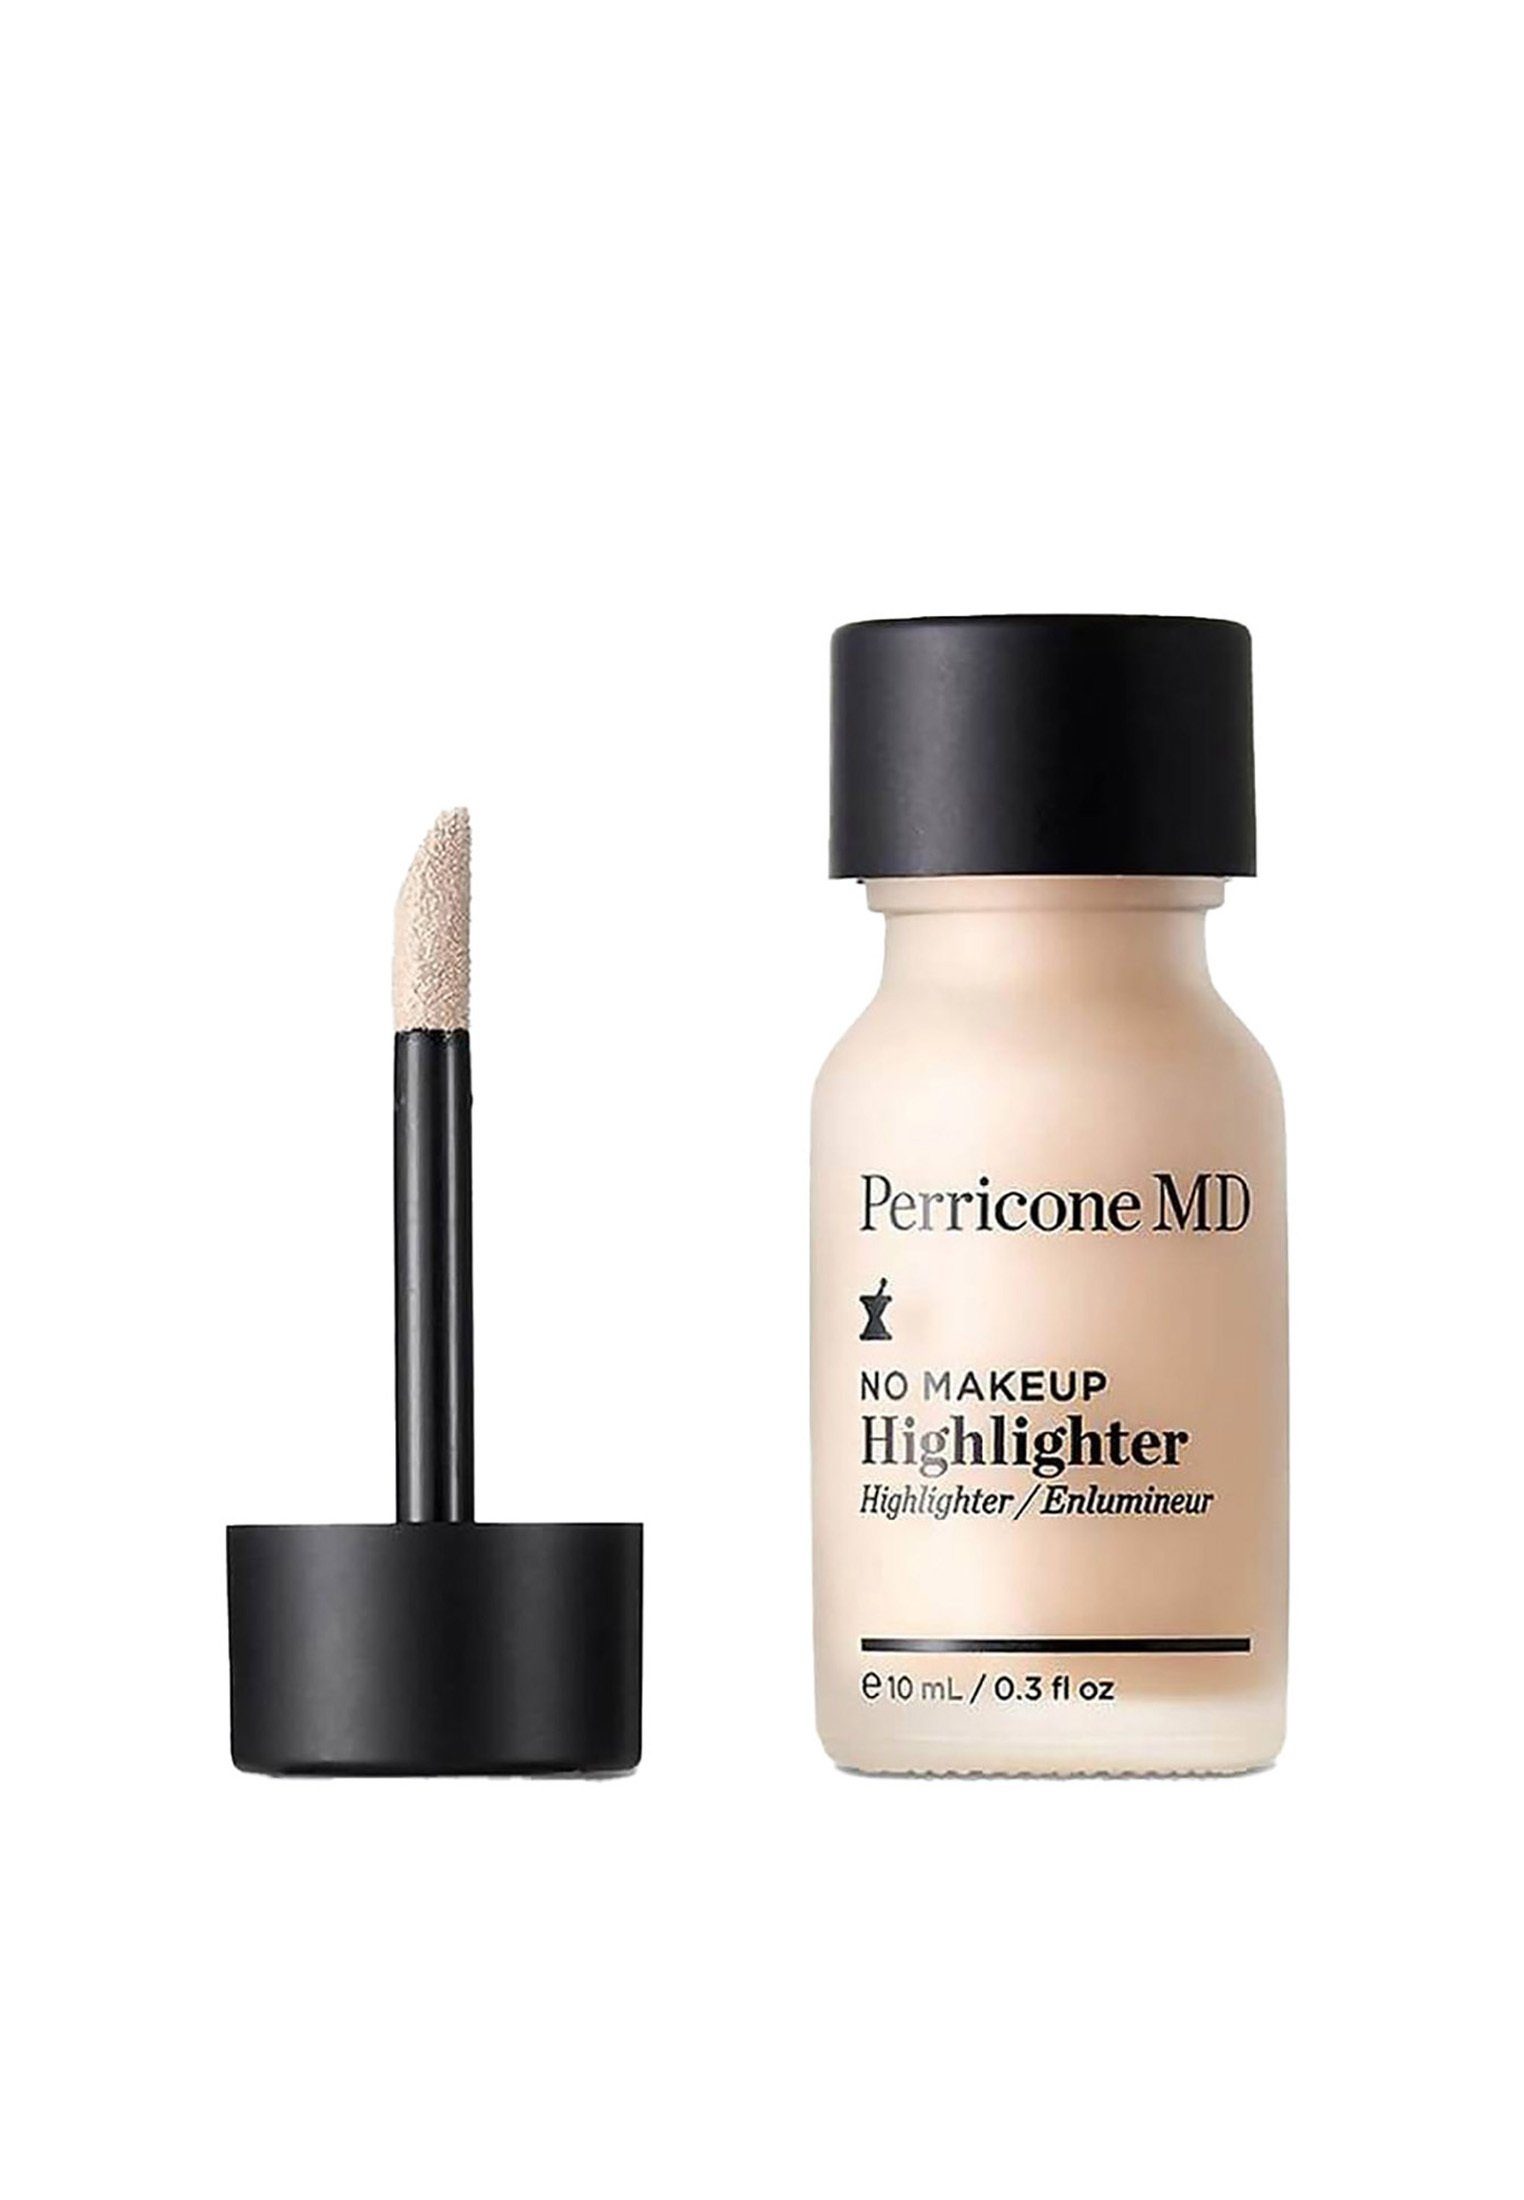 PERRICONE Highlighter Highlighter Makeup PERRICONE No Highlighter